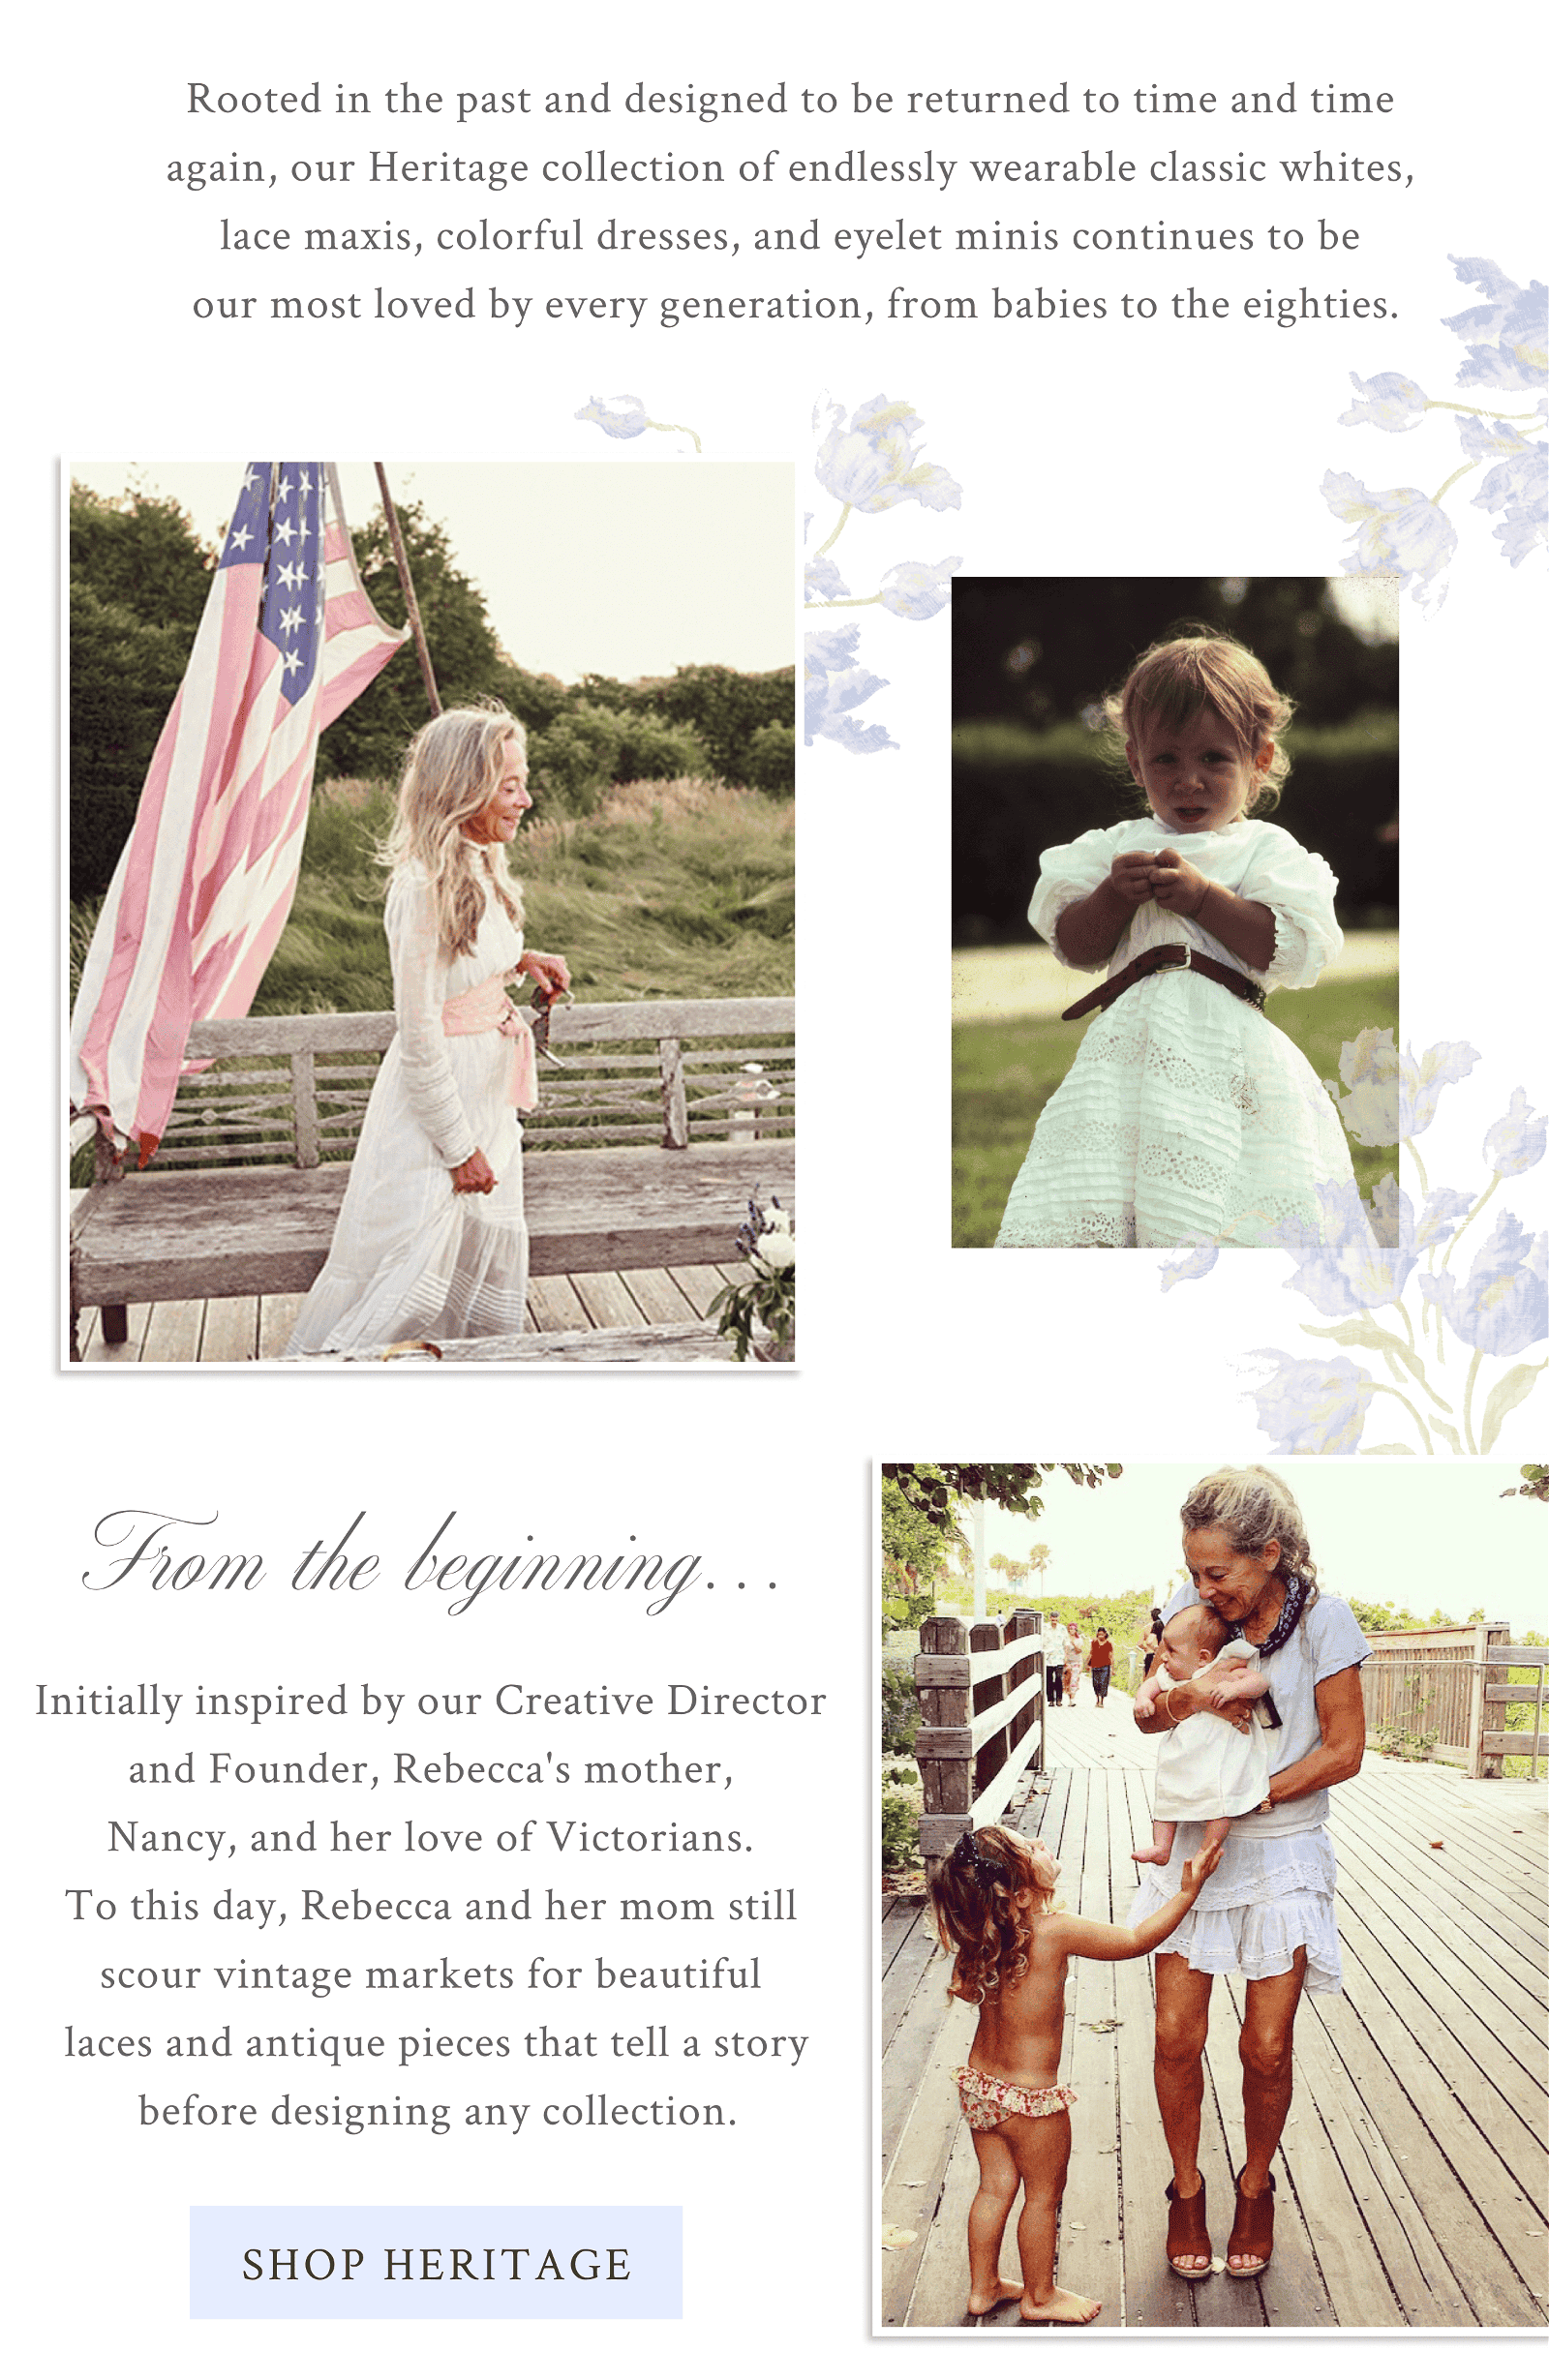 Rooted in the past and designed to be returned to time and time again, our Heritage collection of endlessly wearable classic whites, lace maxis, colorful dresses, and eyelet minis continues to be our most loved by every generation, from babies to the eighties.